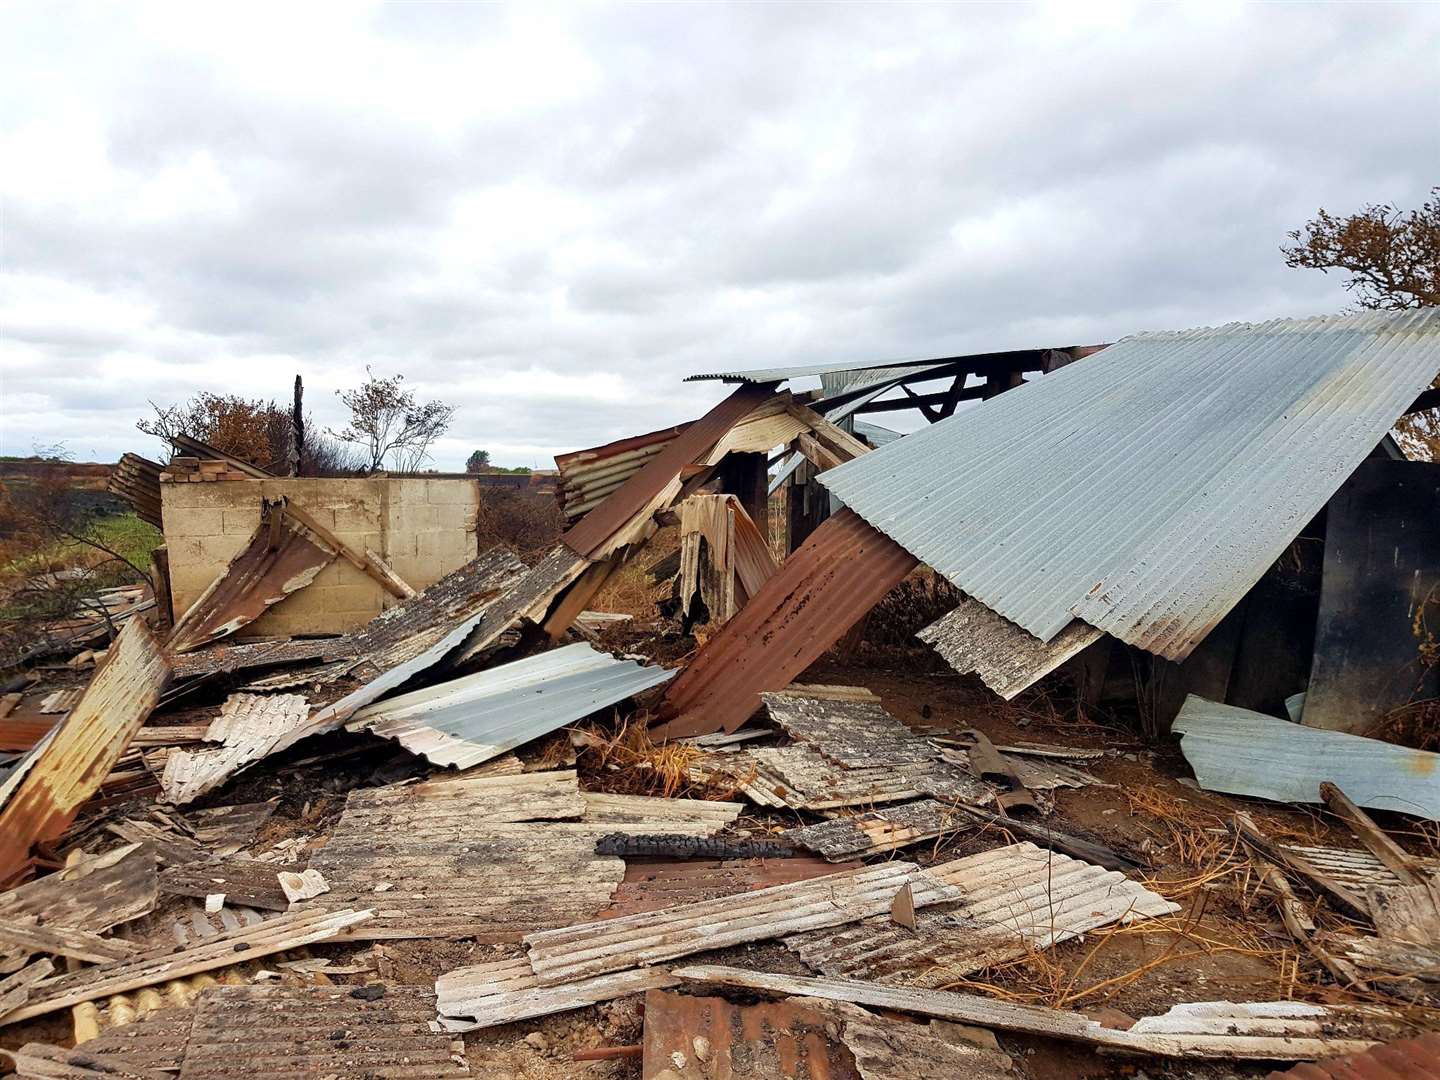 The abandoned Wells Fireworks Factory, reduced to rubble. Image: Matt Thomas